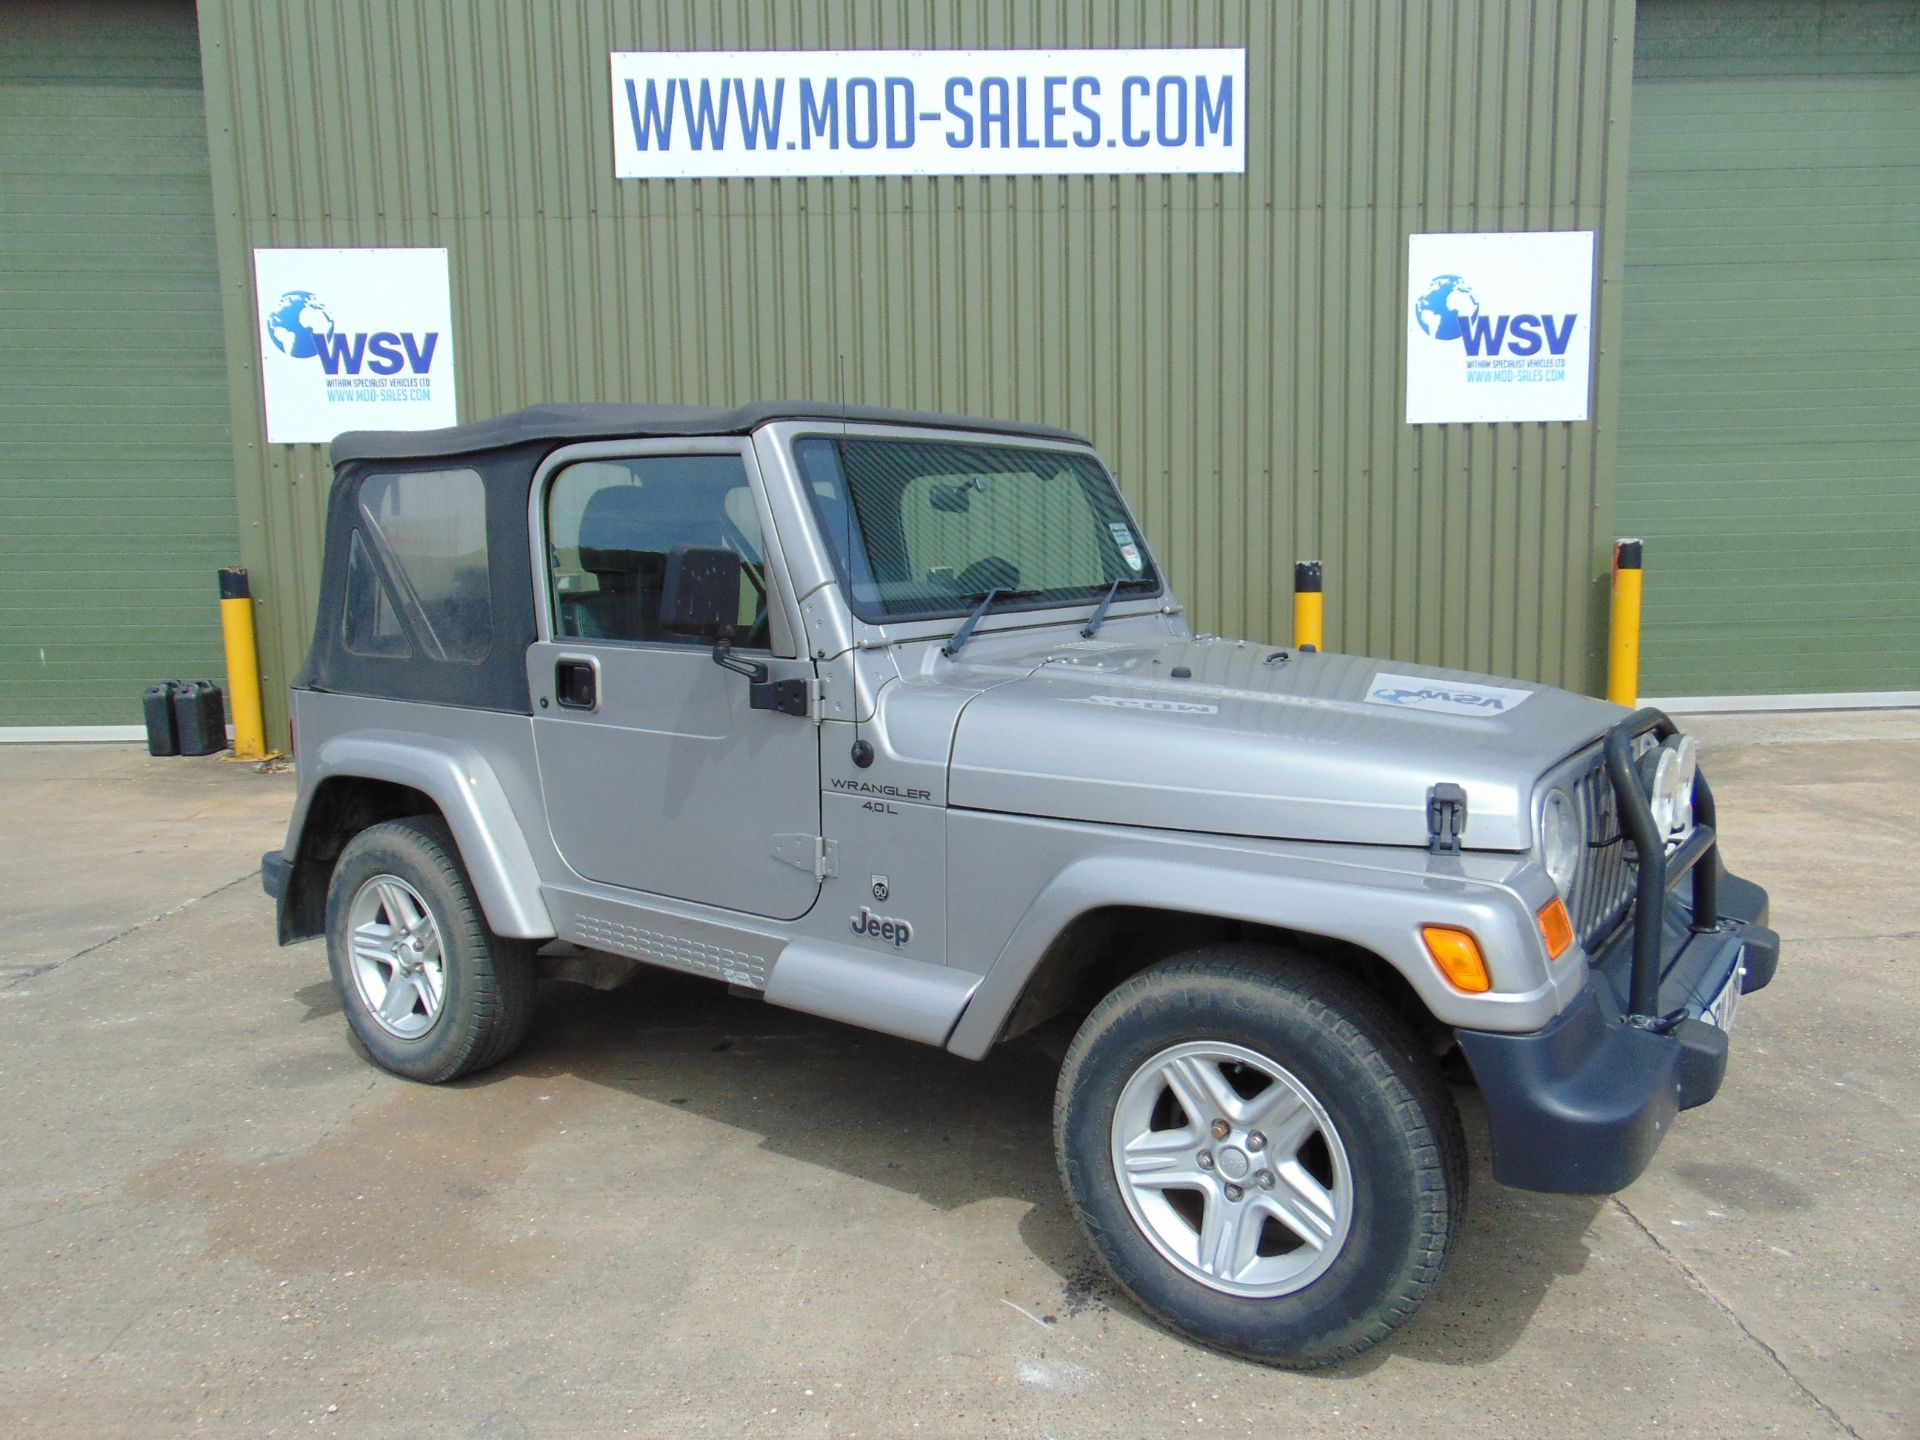 Stunning 2001 Jeep Wrangler 60TH Anniversary 4.0L Great 4X4 Iconic Classic ONLY 17,613 Miles!